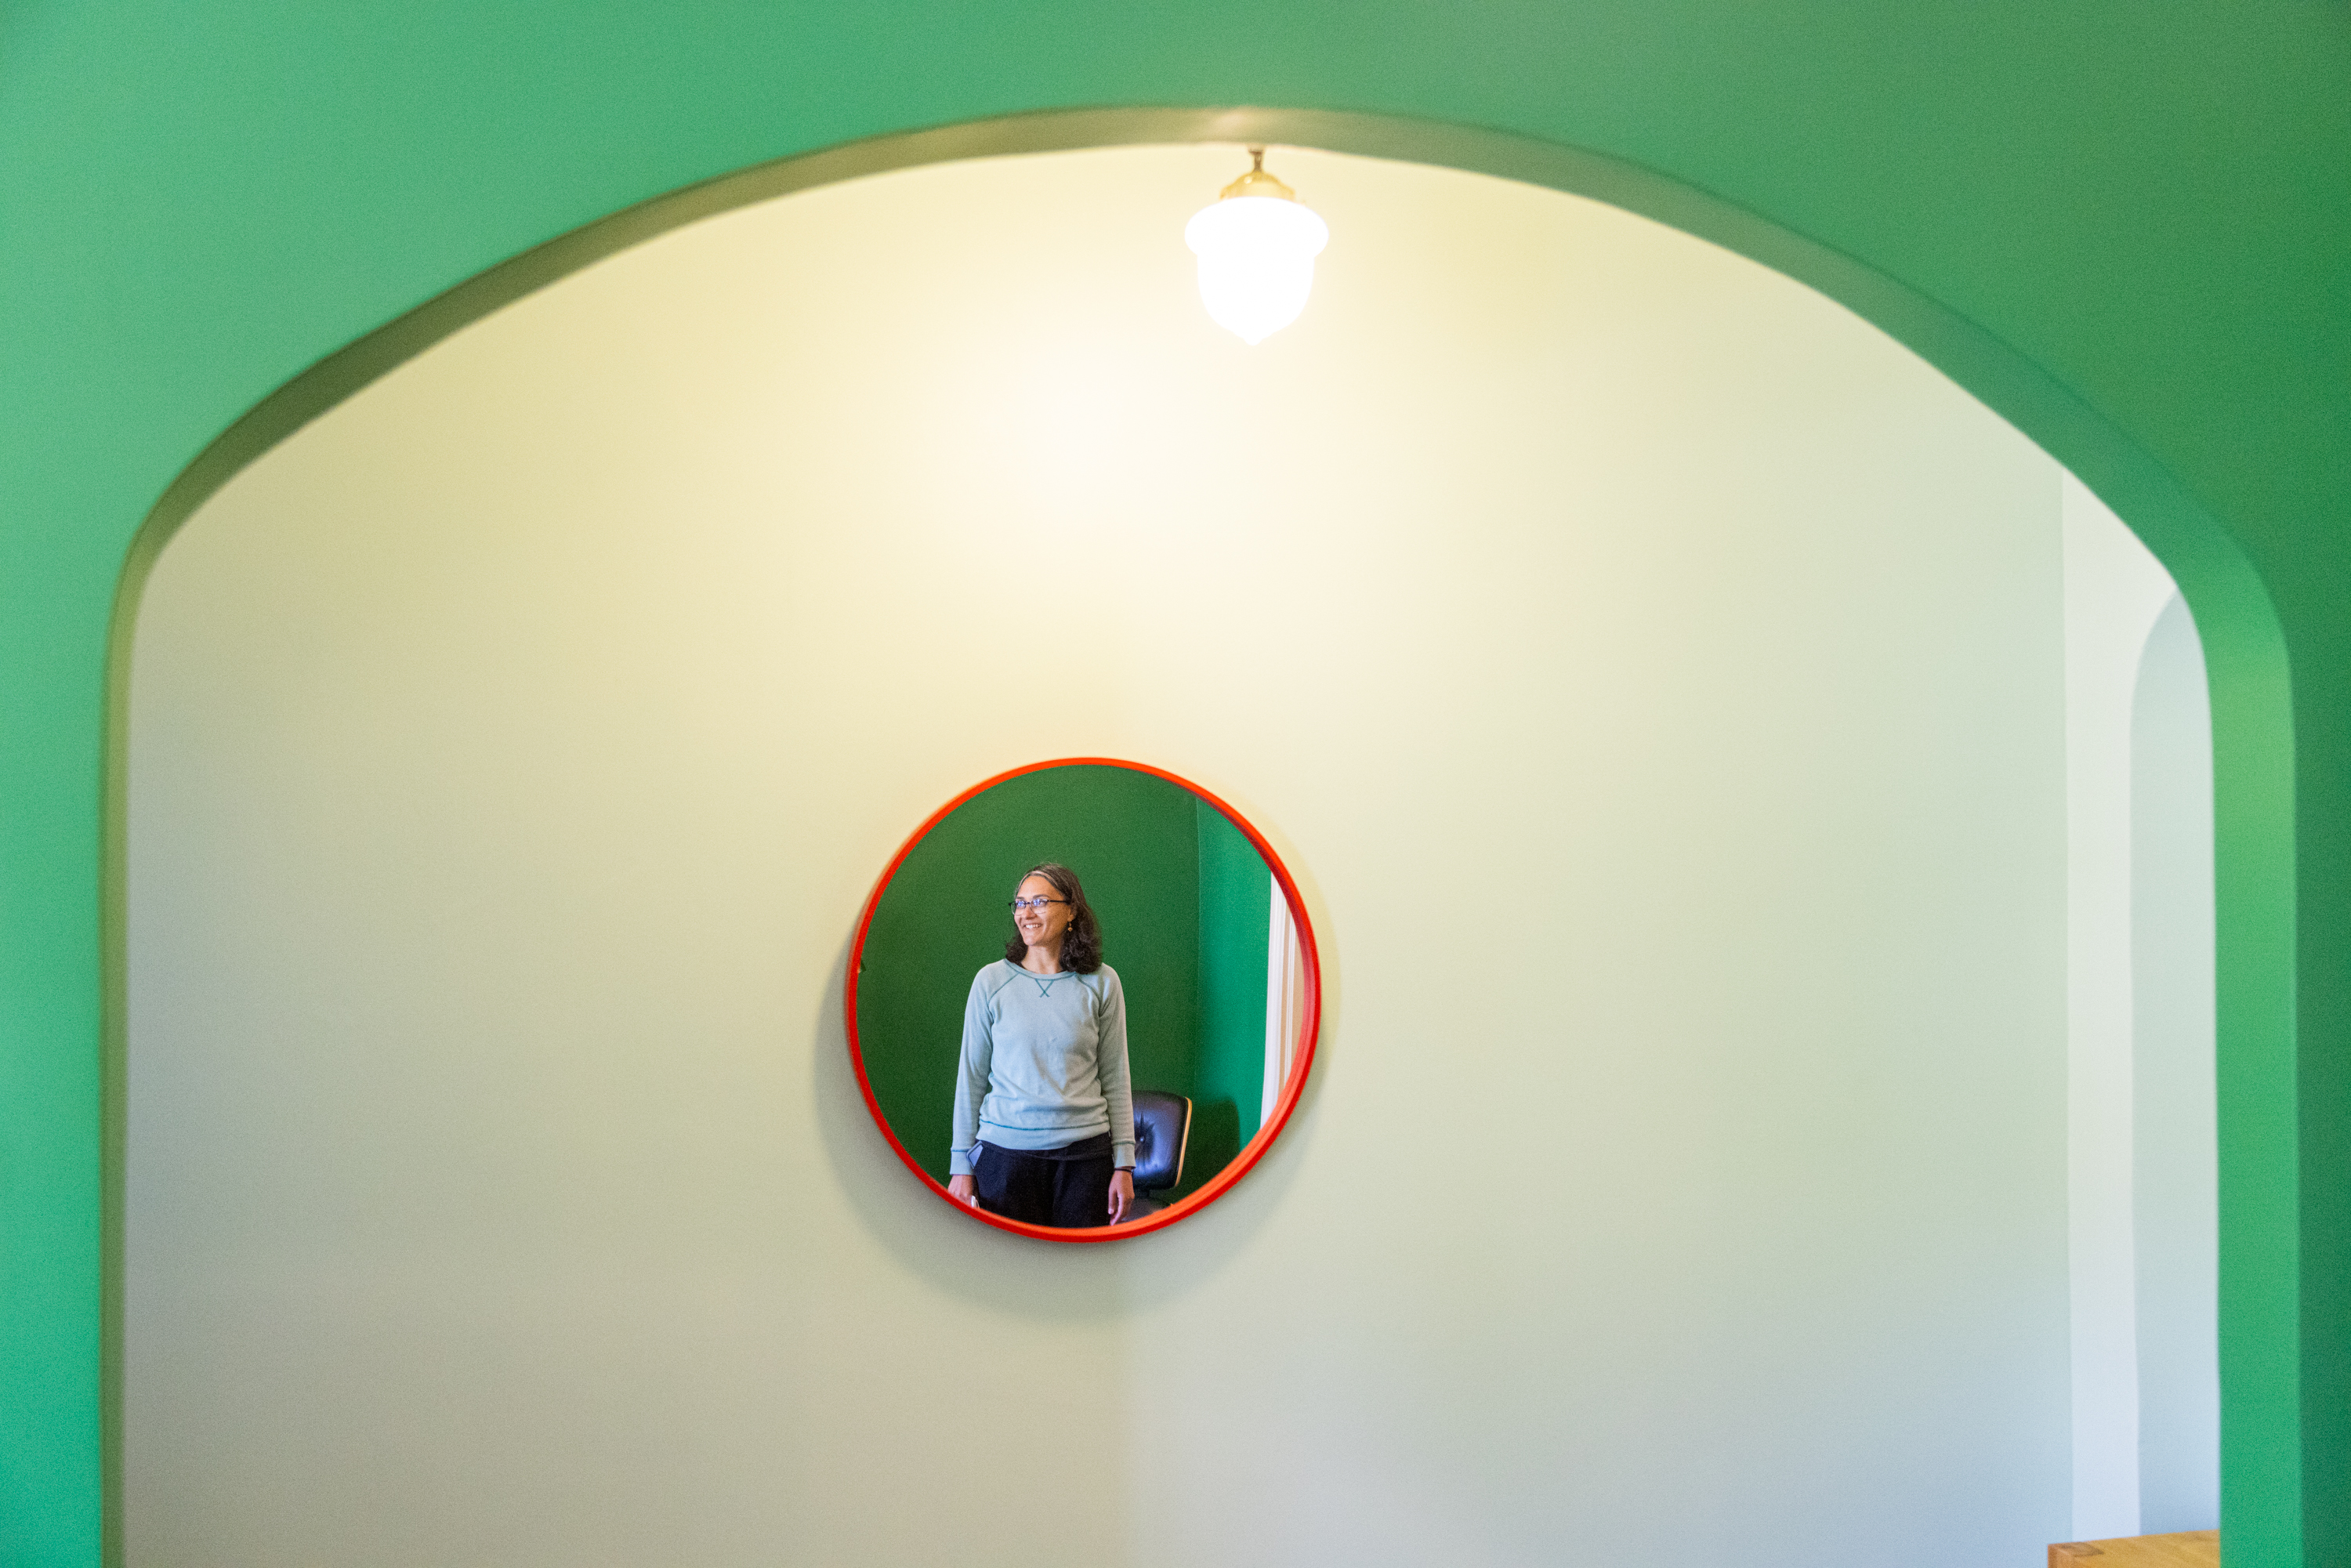 A woman is reflected in a round mirror with a red frame on a green and cream wall, under an arched alcove with a hanging light.